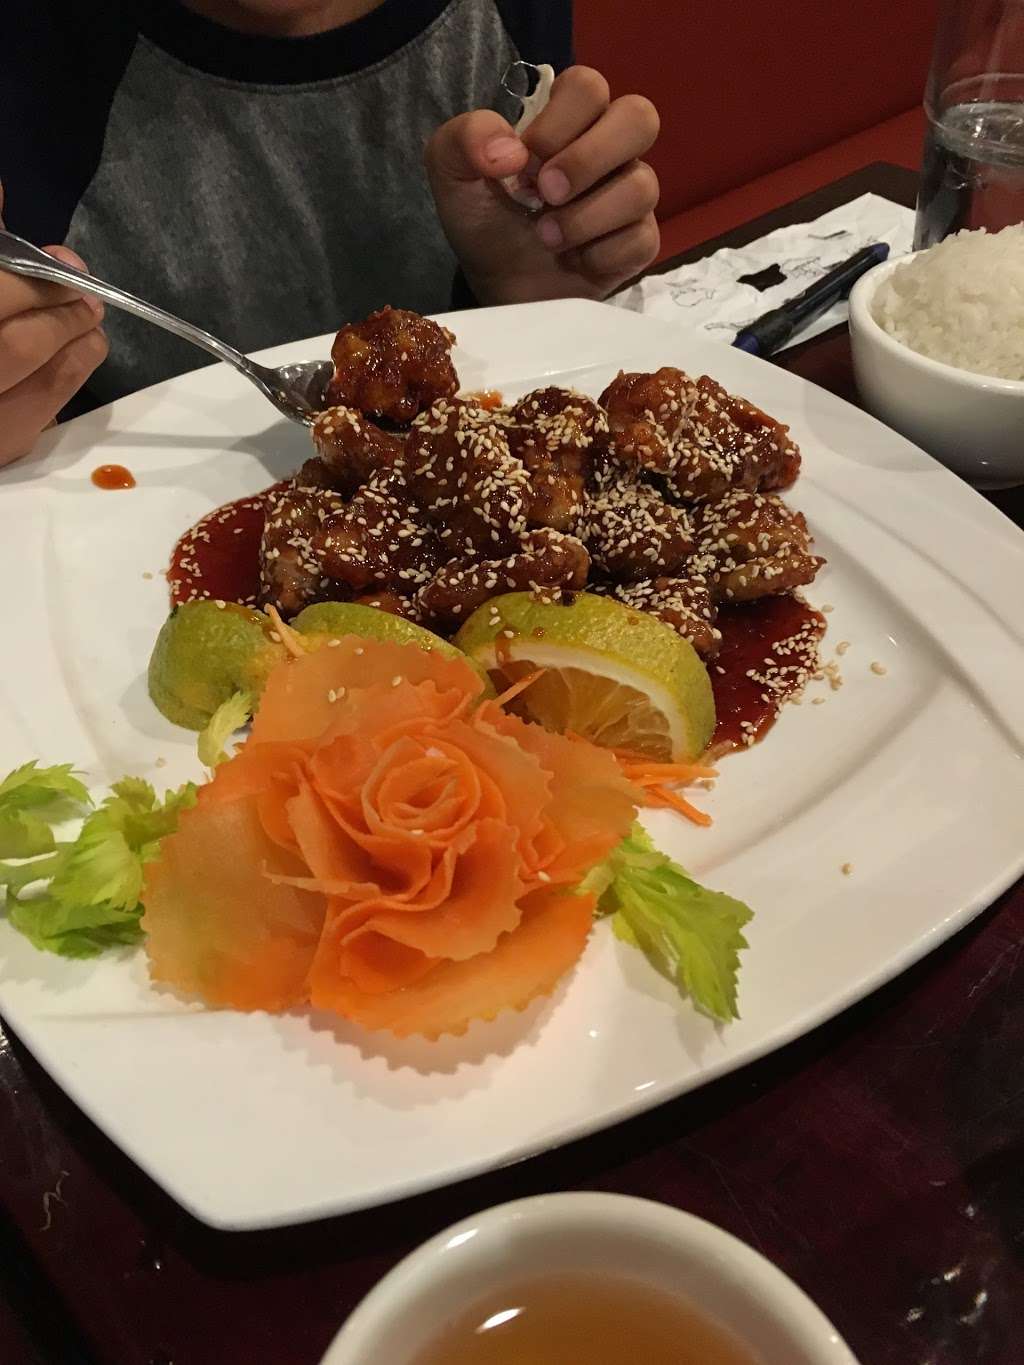 House of Hunan | 2311 Forest Dr, Annapolis, MD 21401, USA | Phone: (410) 266-1680